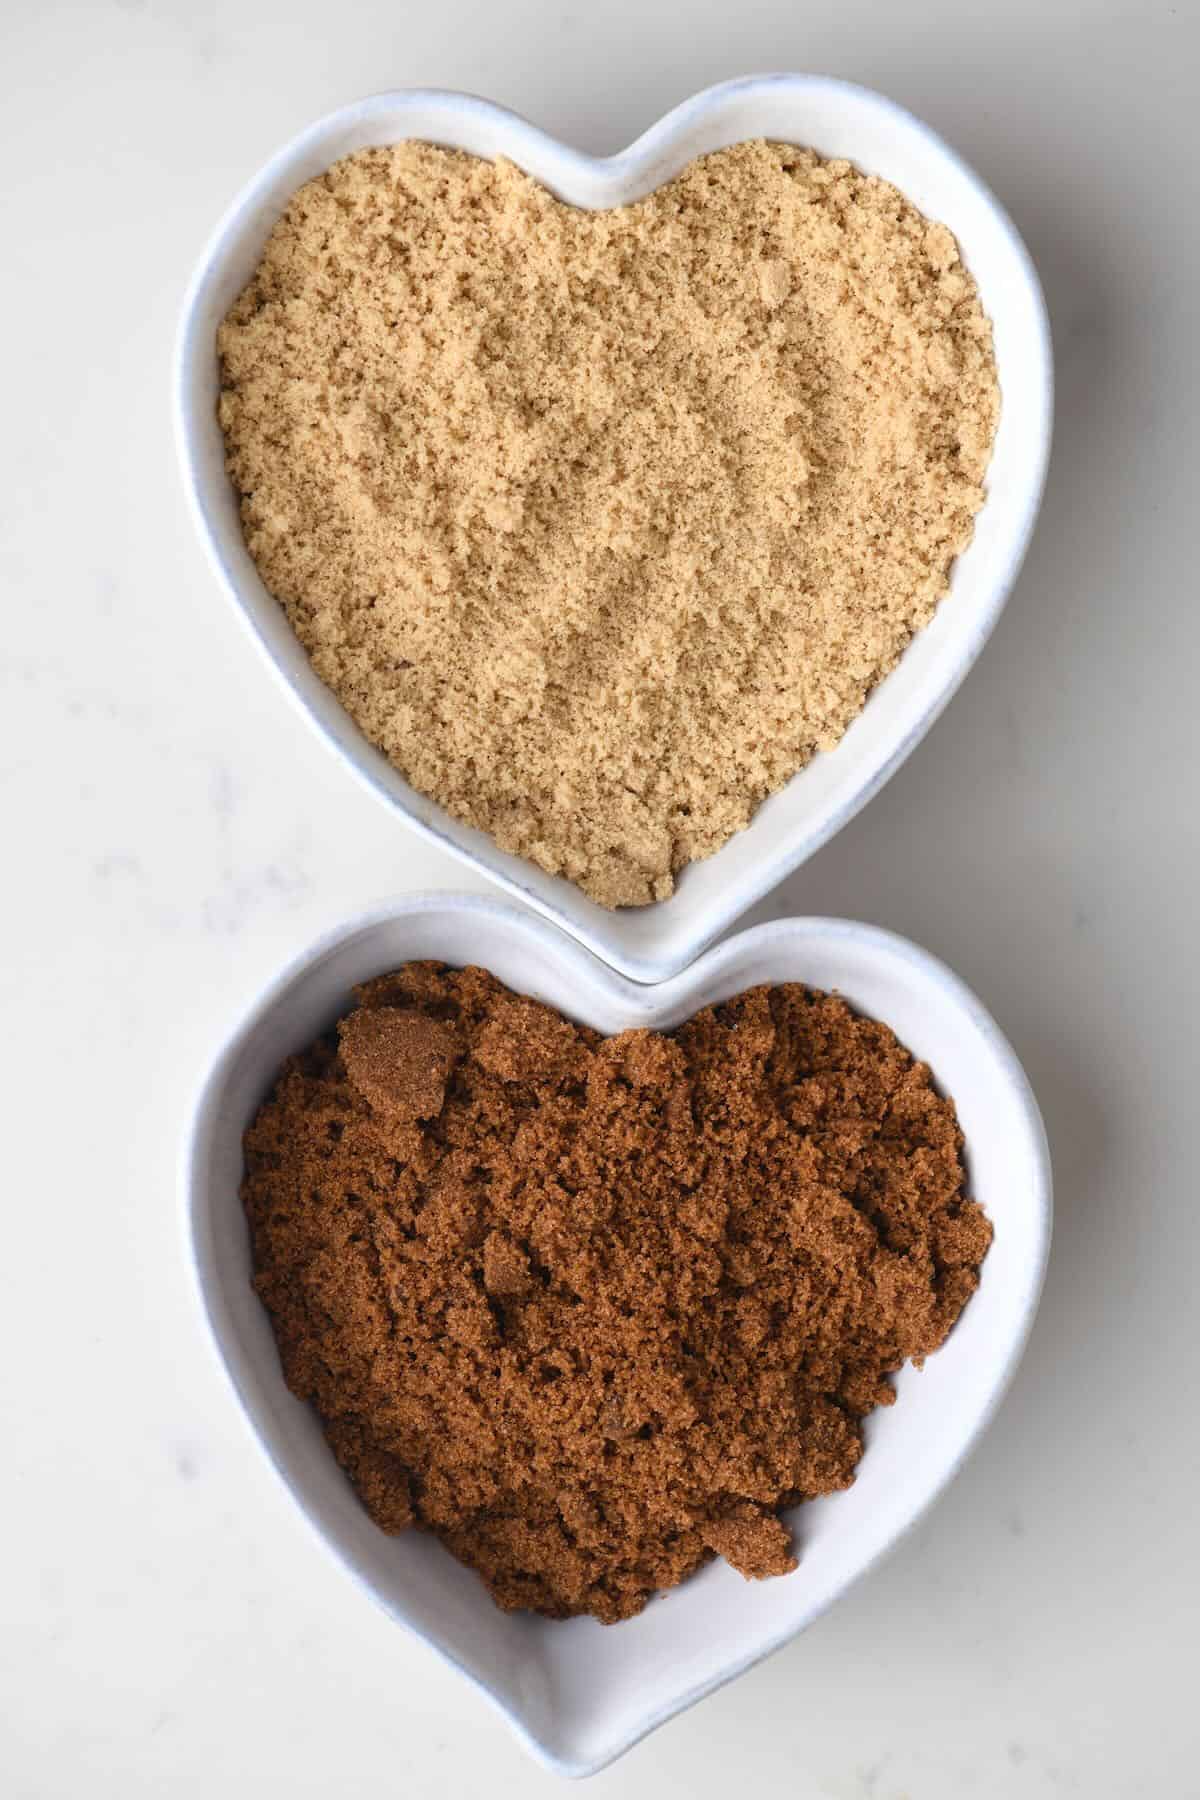 https://www.alphafoodie.com/wp-content/uploads/2022/01/How-to-Make-Brown-Sugar-Two-bowls-with-light-and-dark-brown-sugar.jpeg